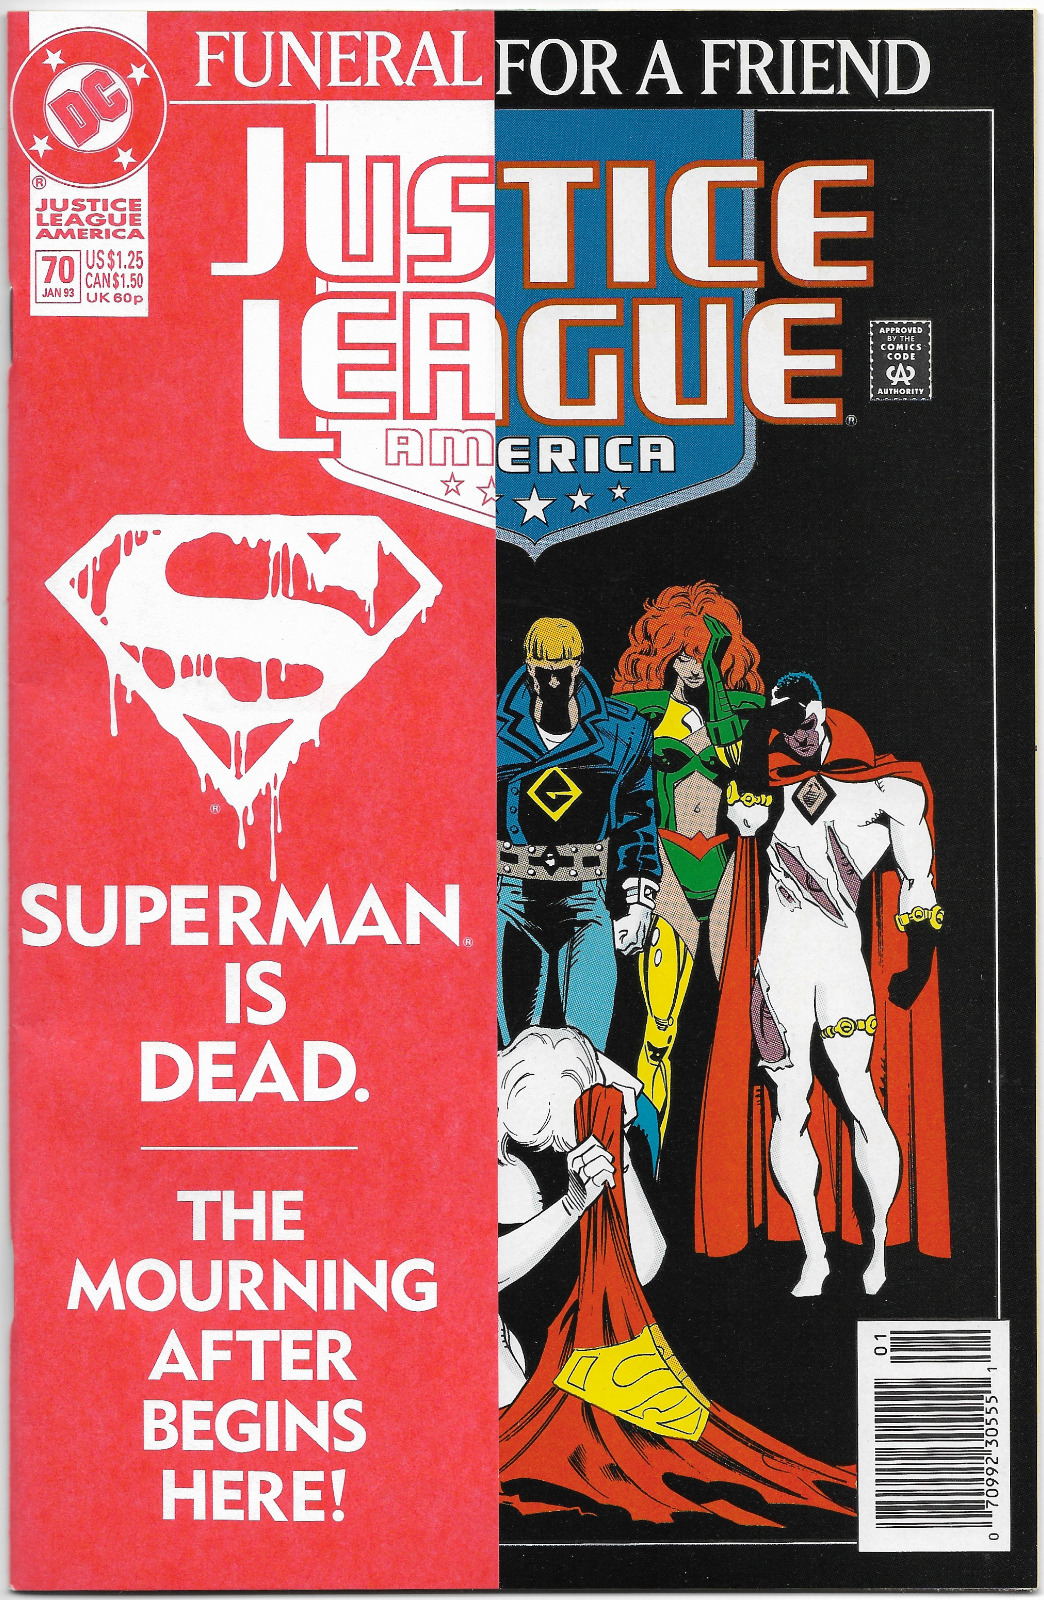 Justice League America #70 1993 DC Comic FUNERAL FOR A FRIEND w/ Outer Cover